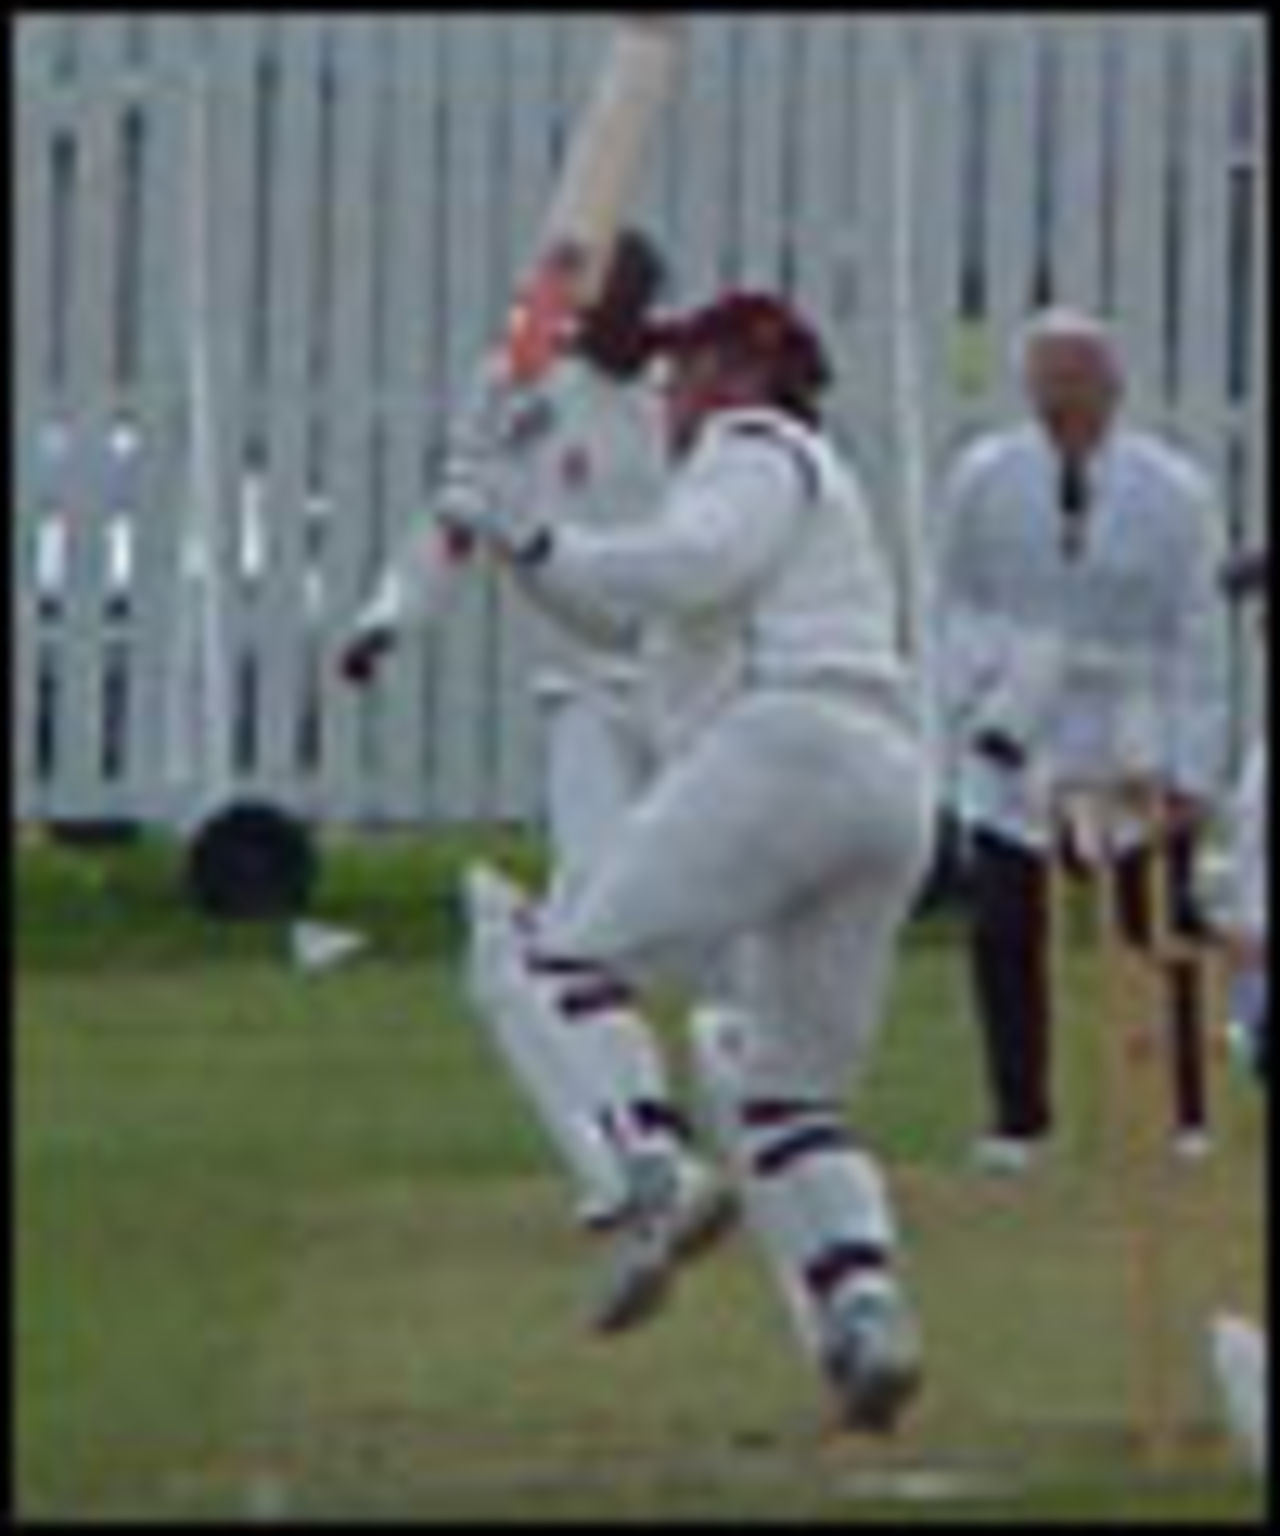 Haslingden captain Paul Blackledge in action during his innings of 42 at Dill Hall Lane